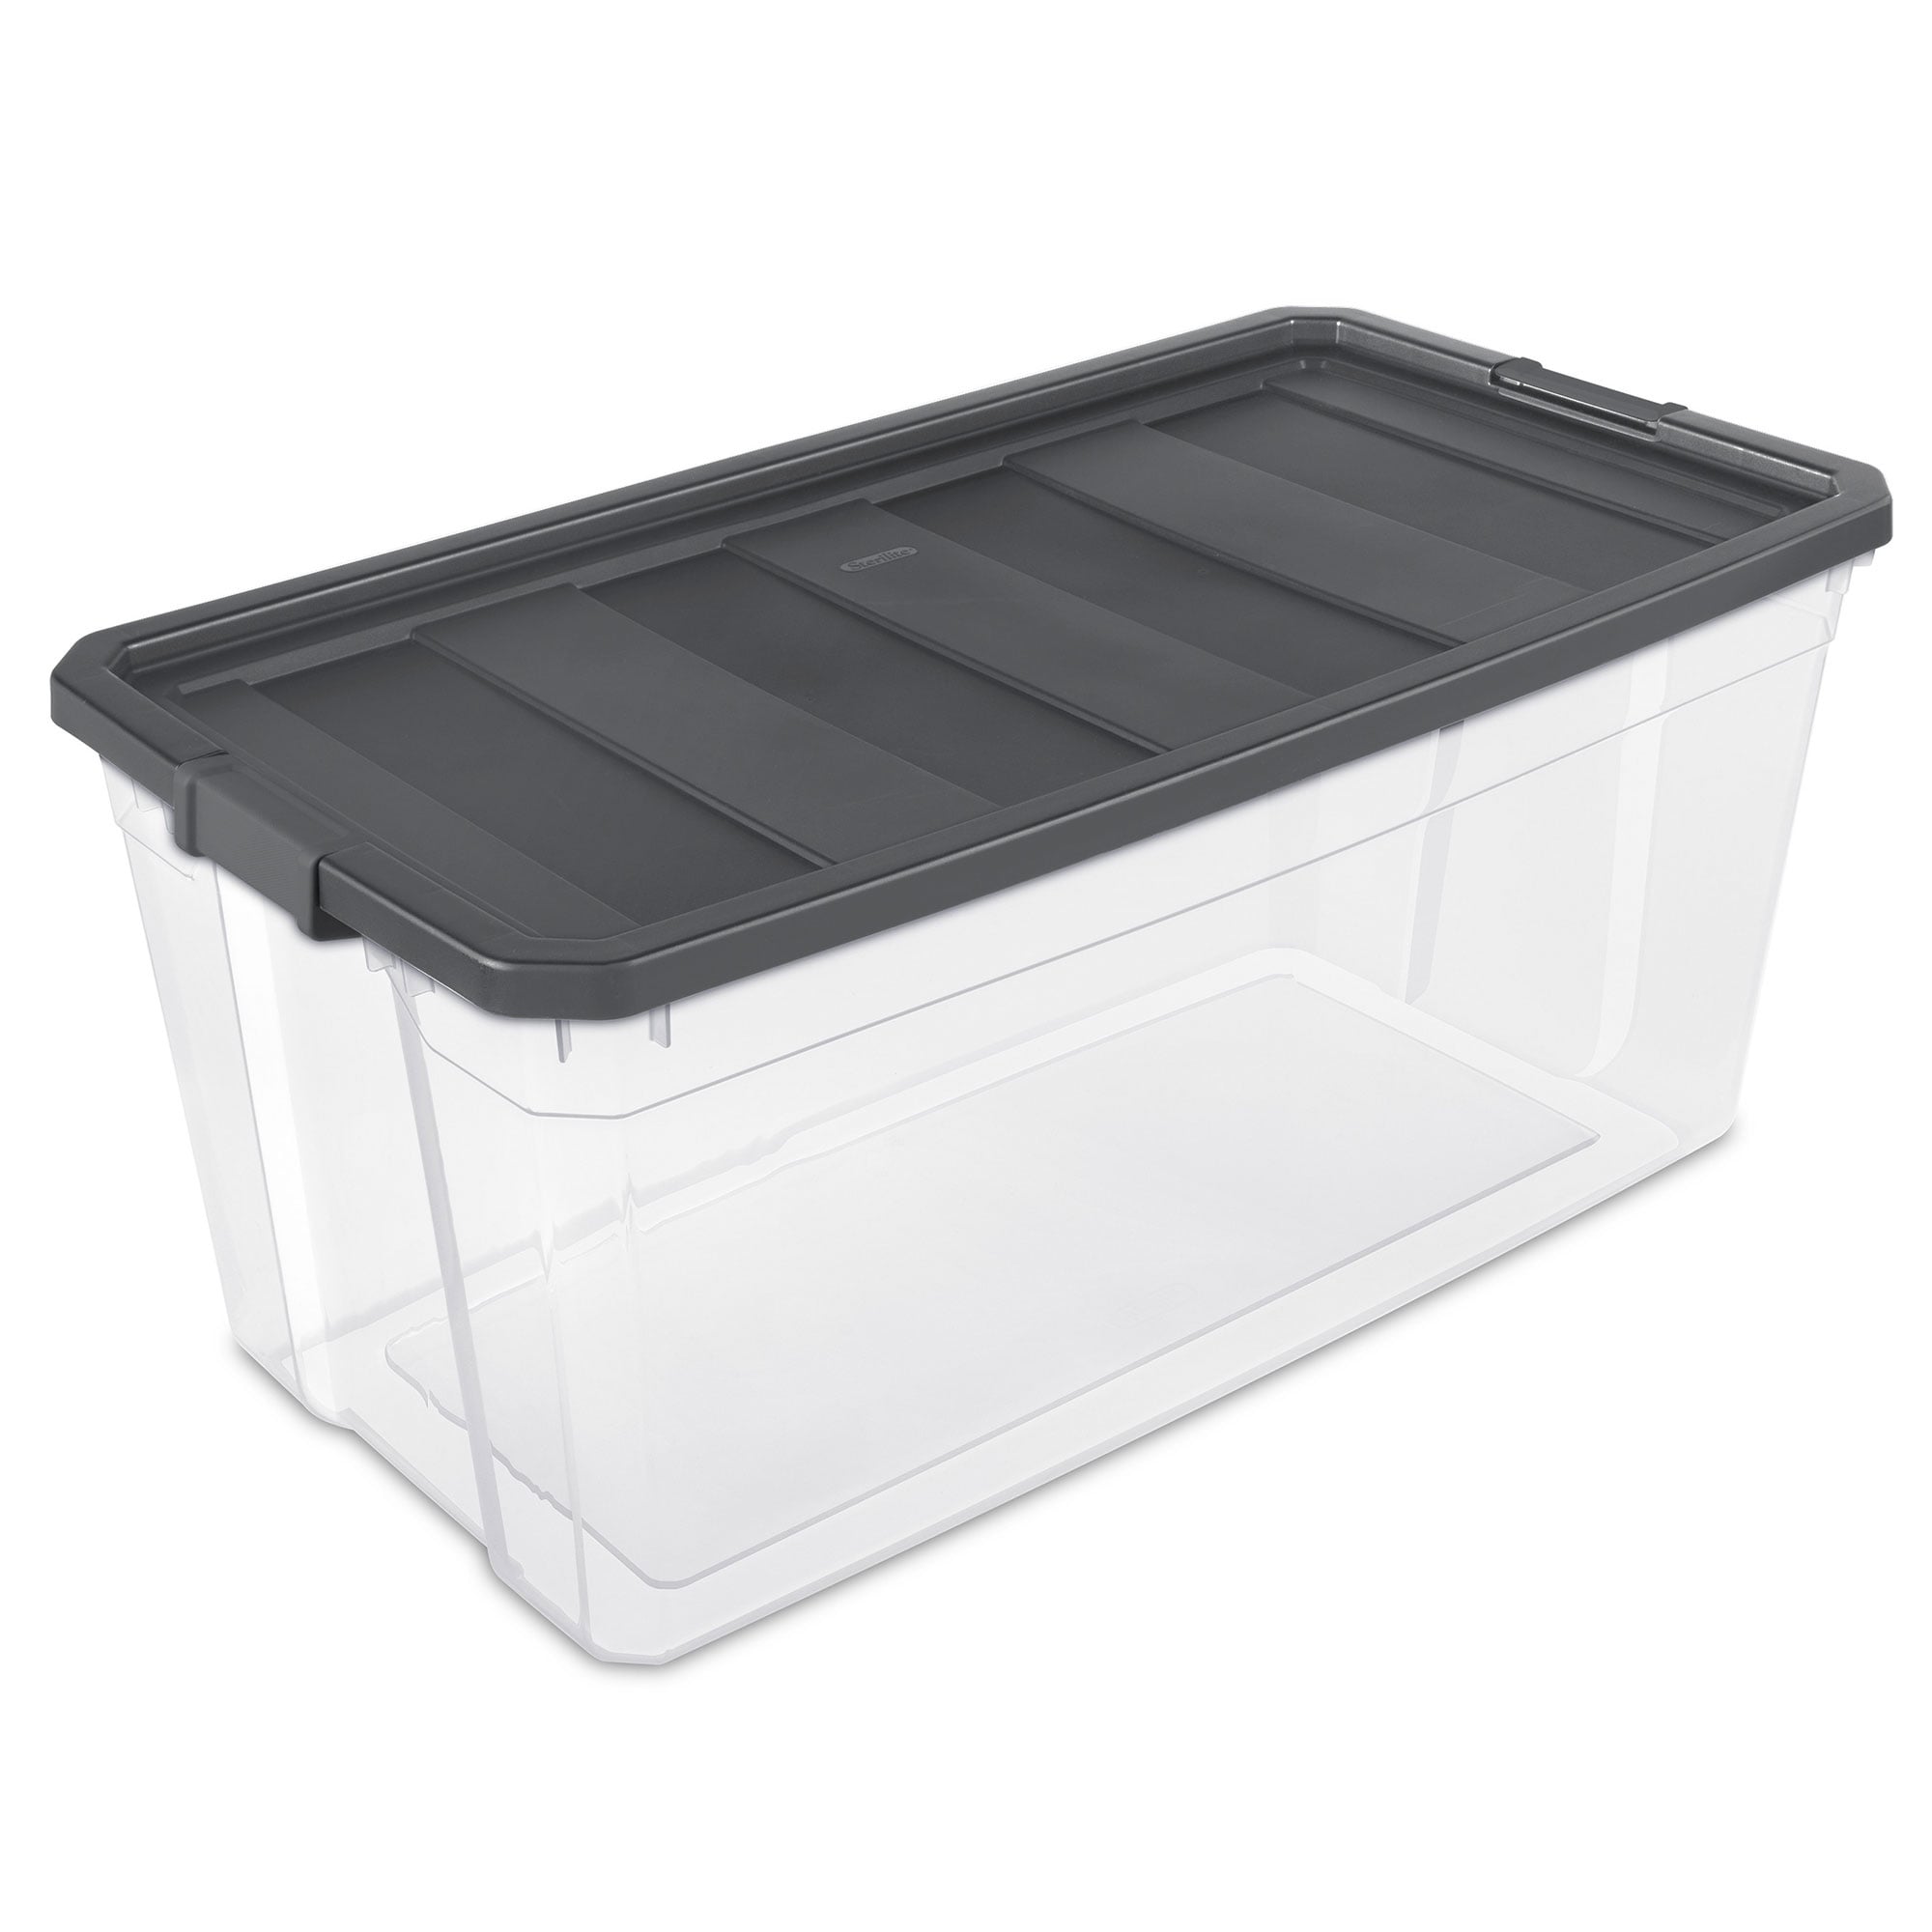  Sterilite 30 Gal Latching Tuff1 Storage Tote, Stackable Bin  with Latch Lid, Plastic Container to Organize Garage, Basement, Gray Base  and Lid, 4-Pack